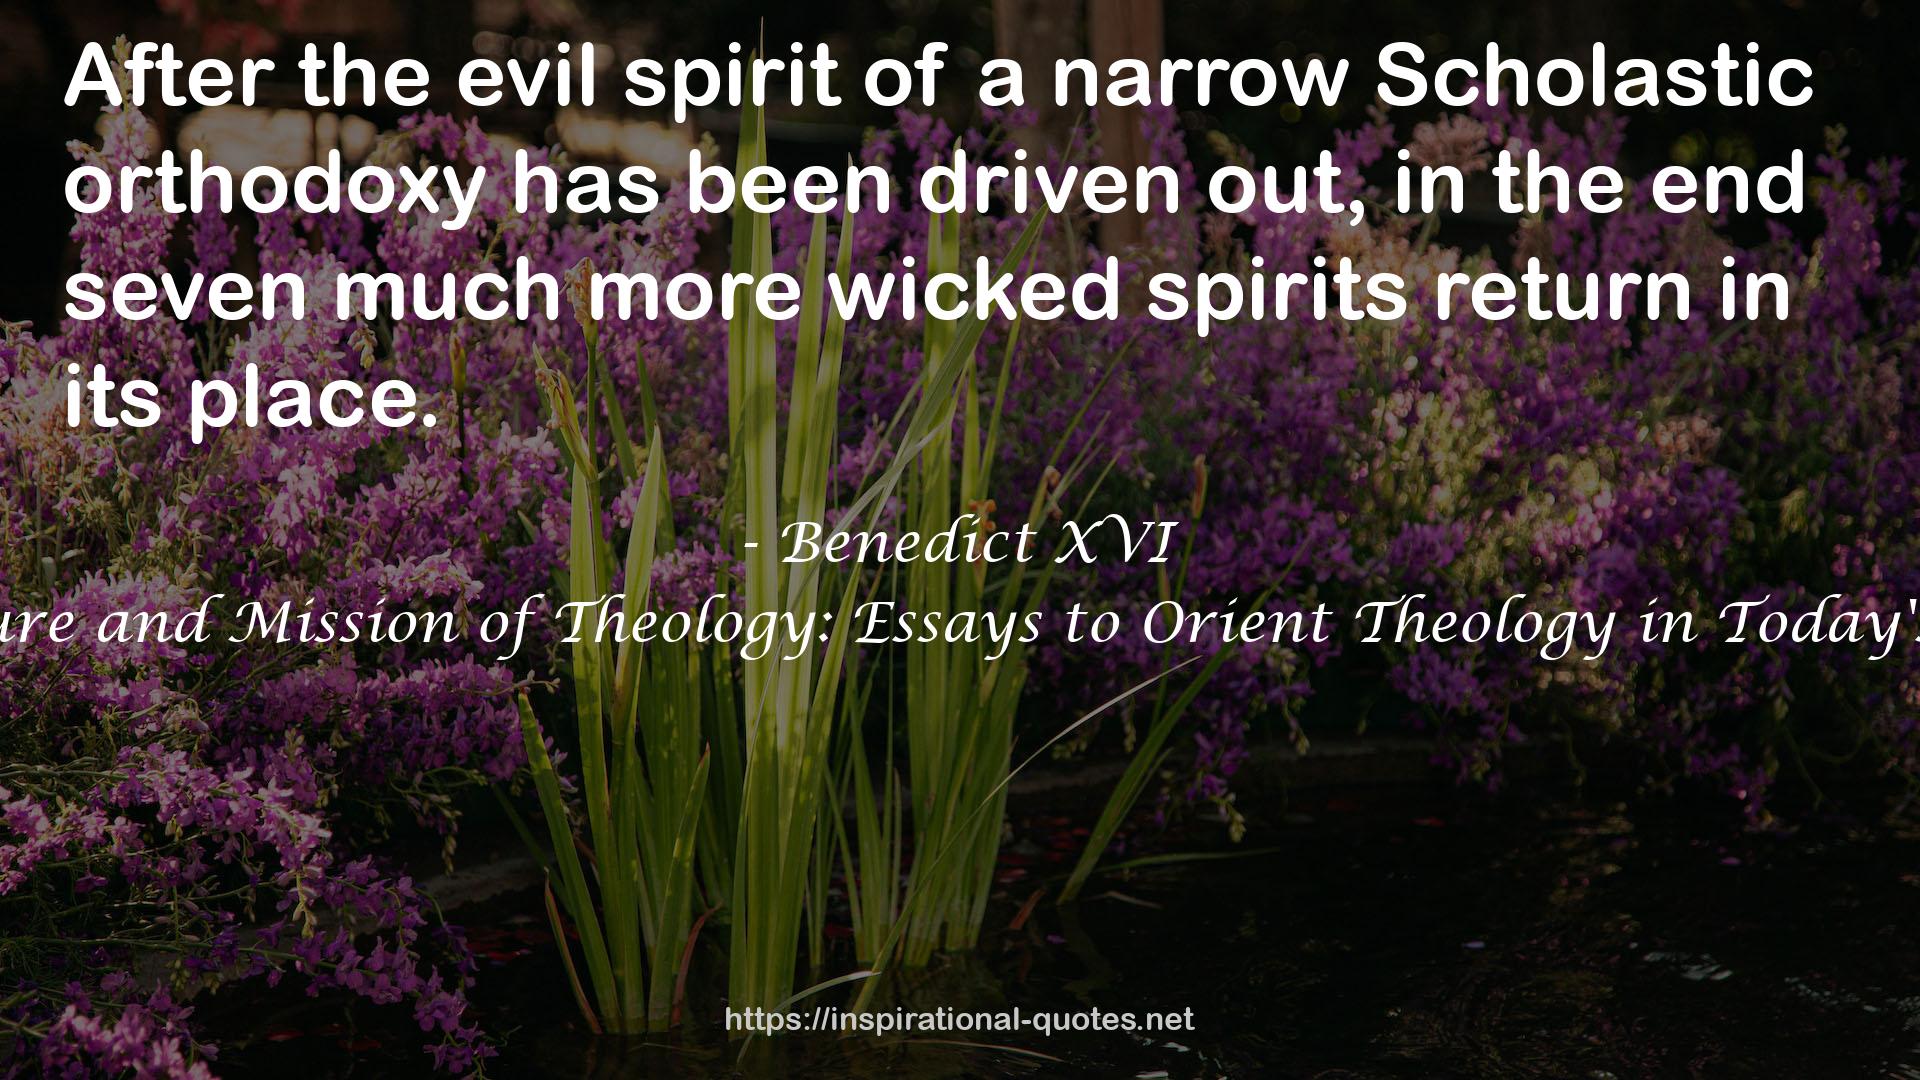 The Nature and Mission of Theology: Essays to Orient Theology in Today's Debates QUOTES